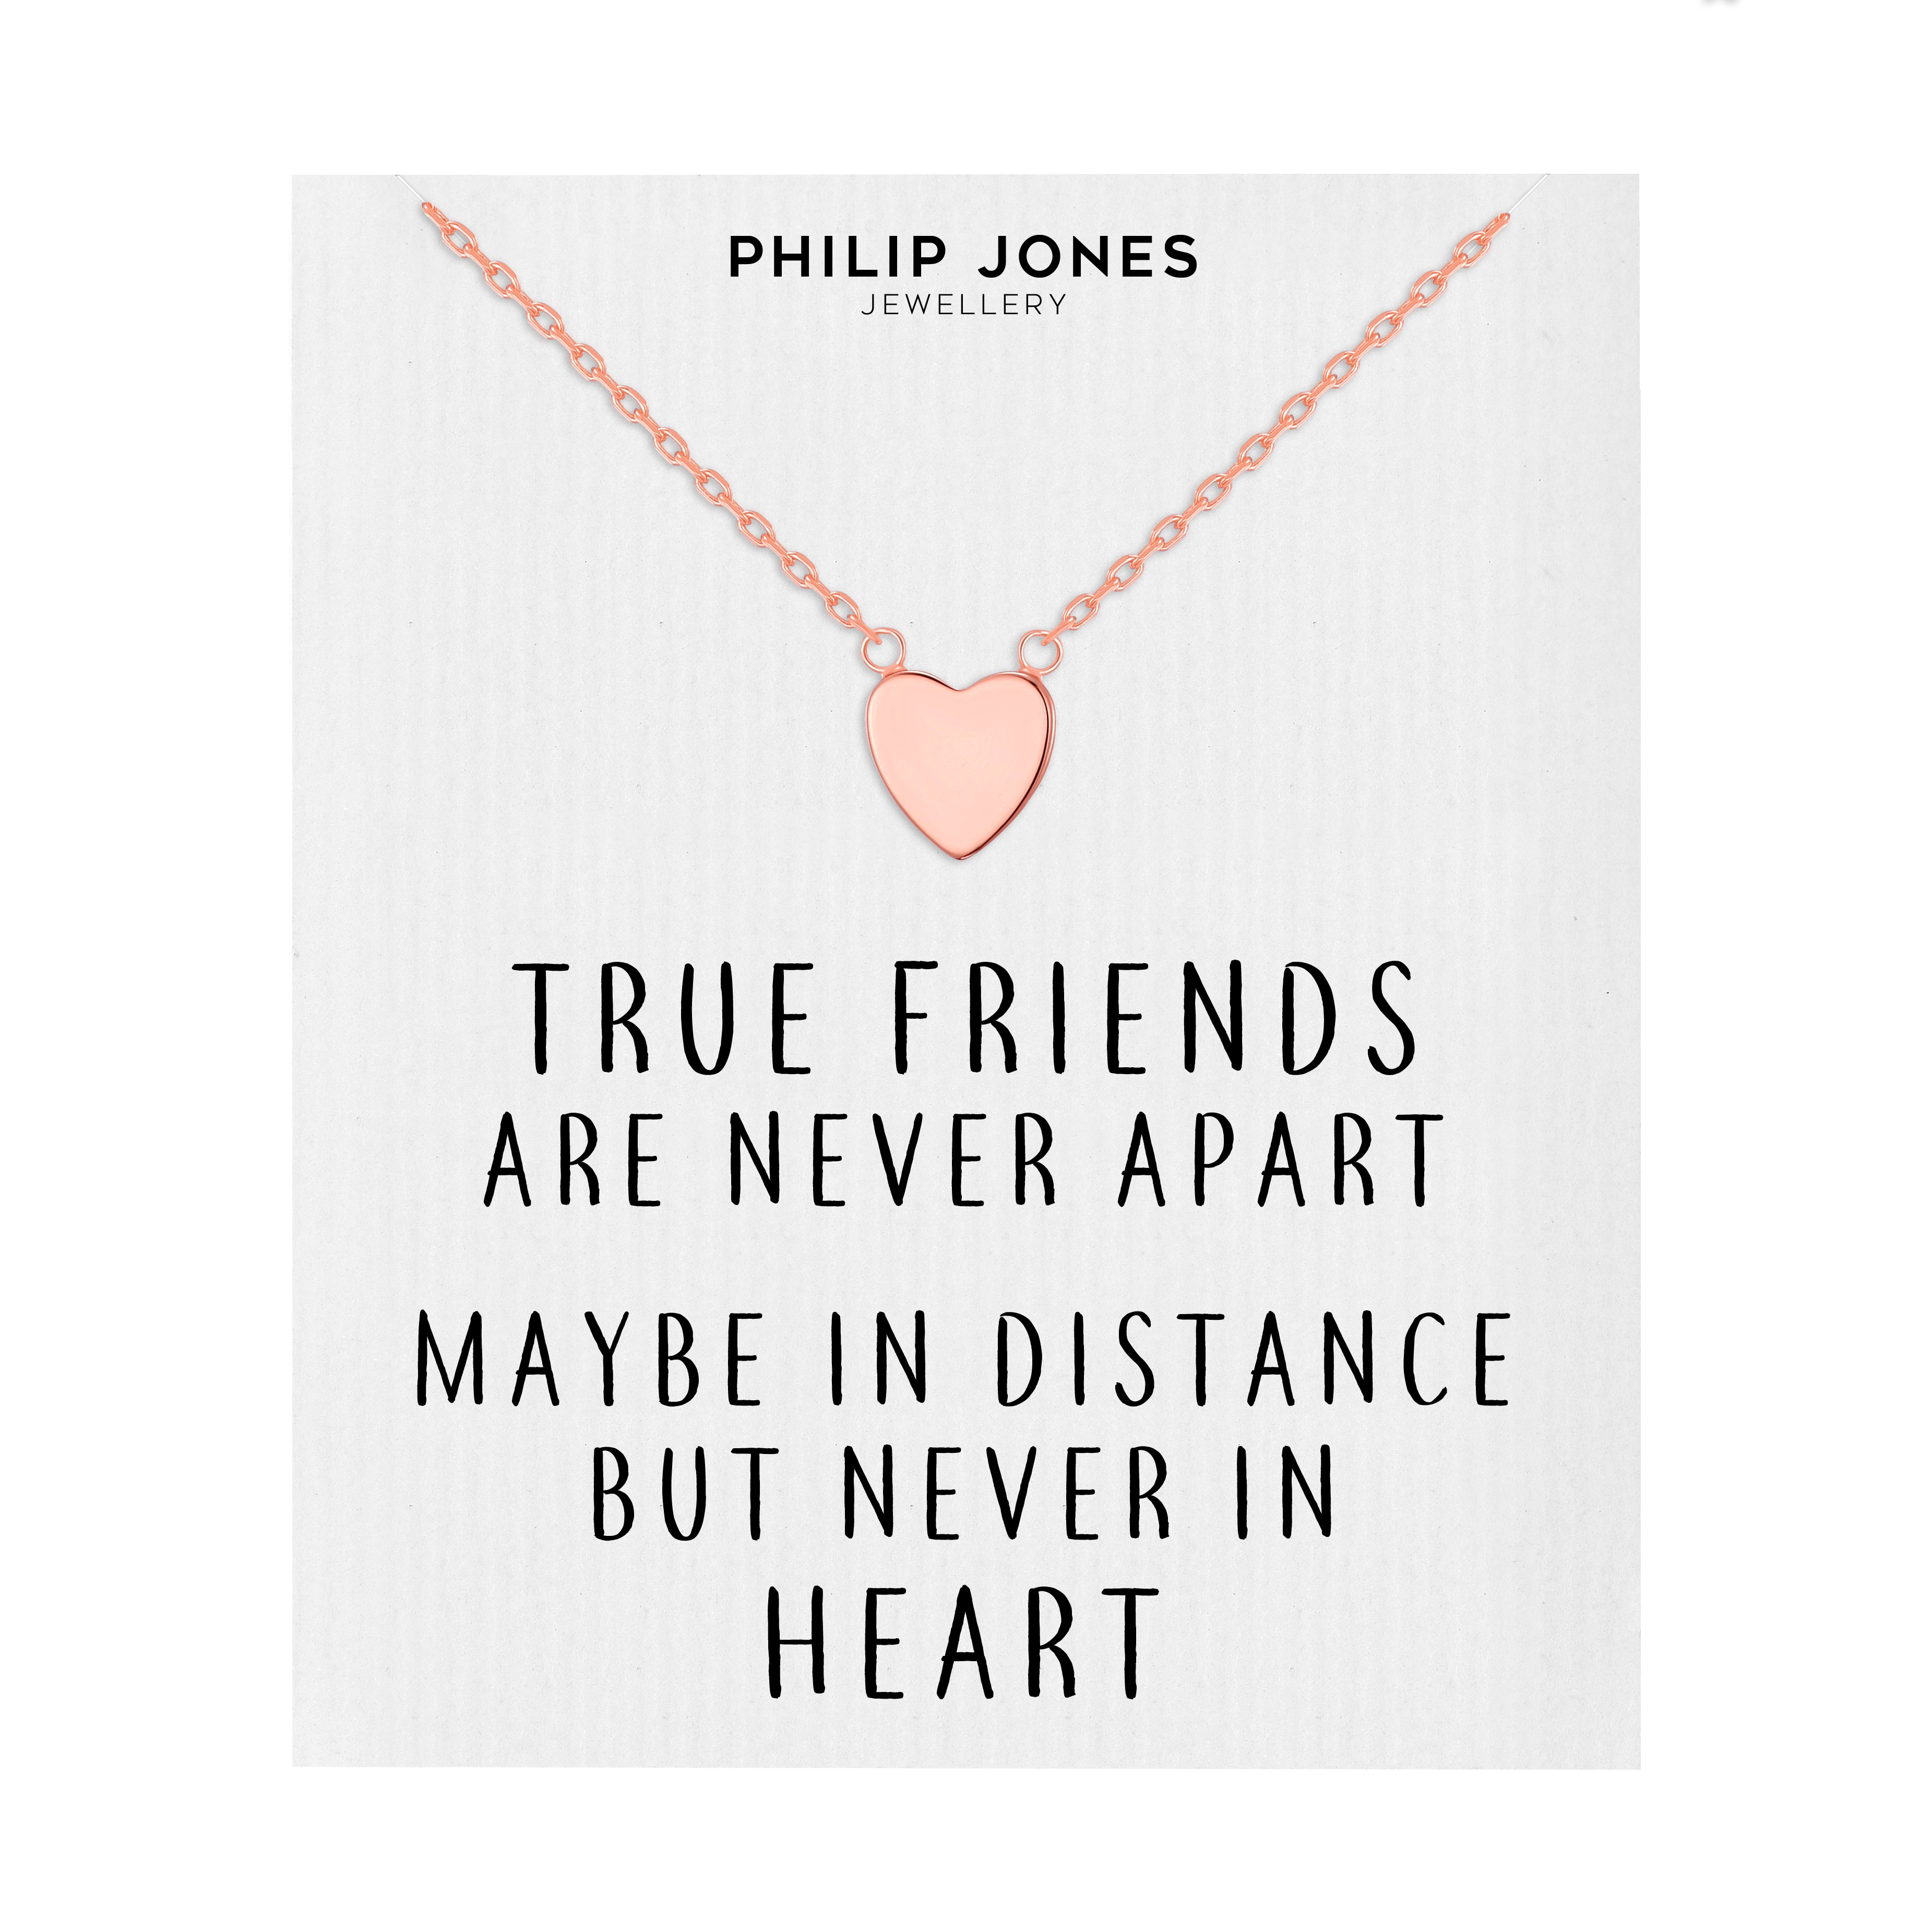 Rose Gold Plated Heart Necklace with Quote Card by Philip Jones Jewellery